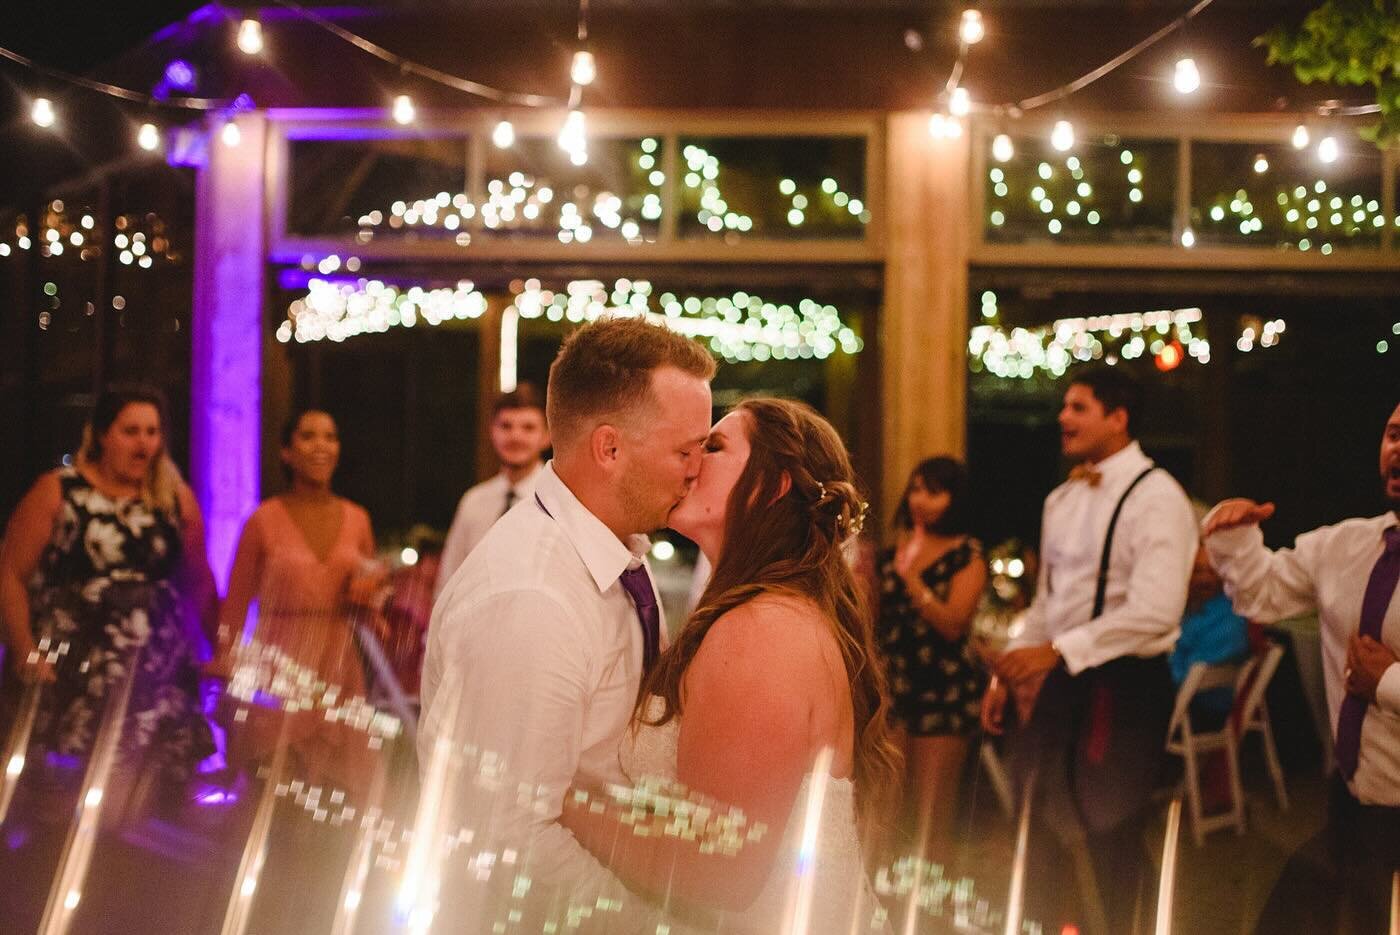 Lights, lights and more lights! The best photos come from the best light. I have lots of experience searching out and utilizing the best light to the best advantage. But it doesn&rsquo;t hurt to consider light when planning your wedding. 

You can ge